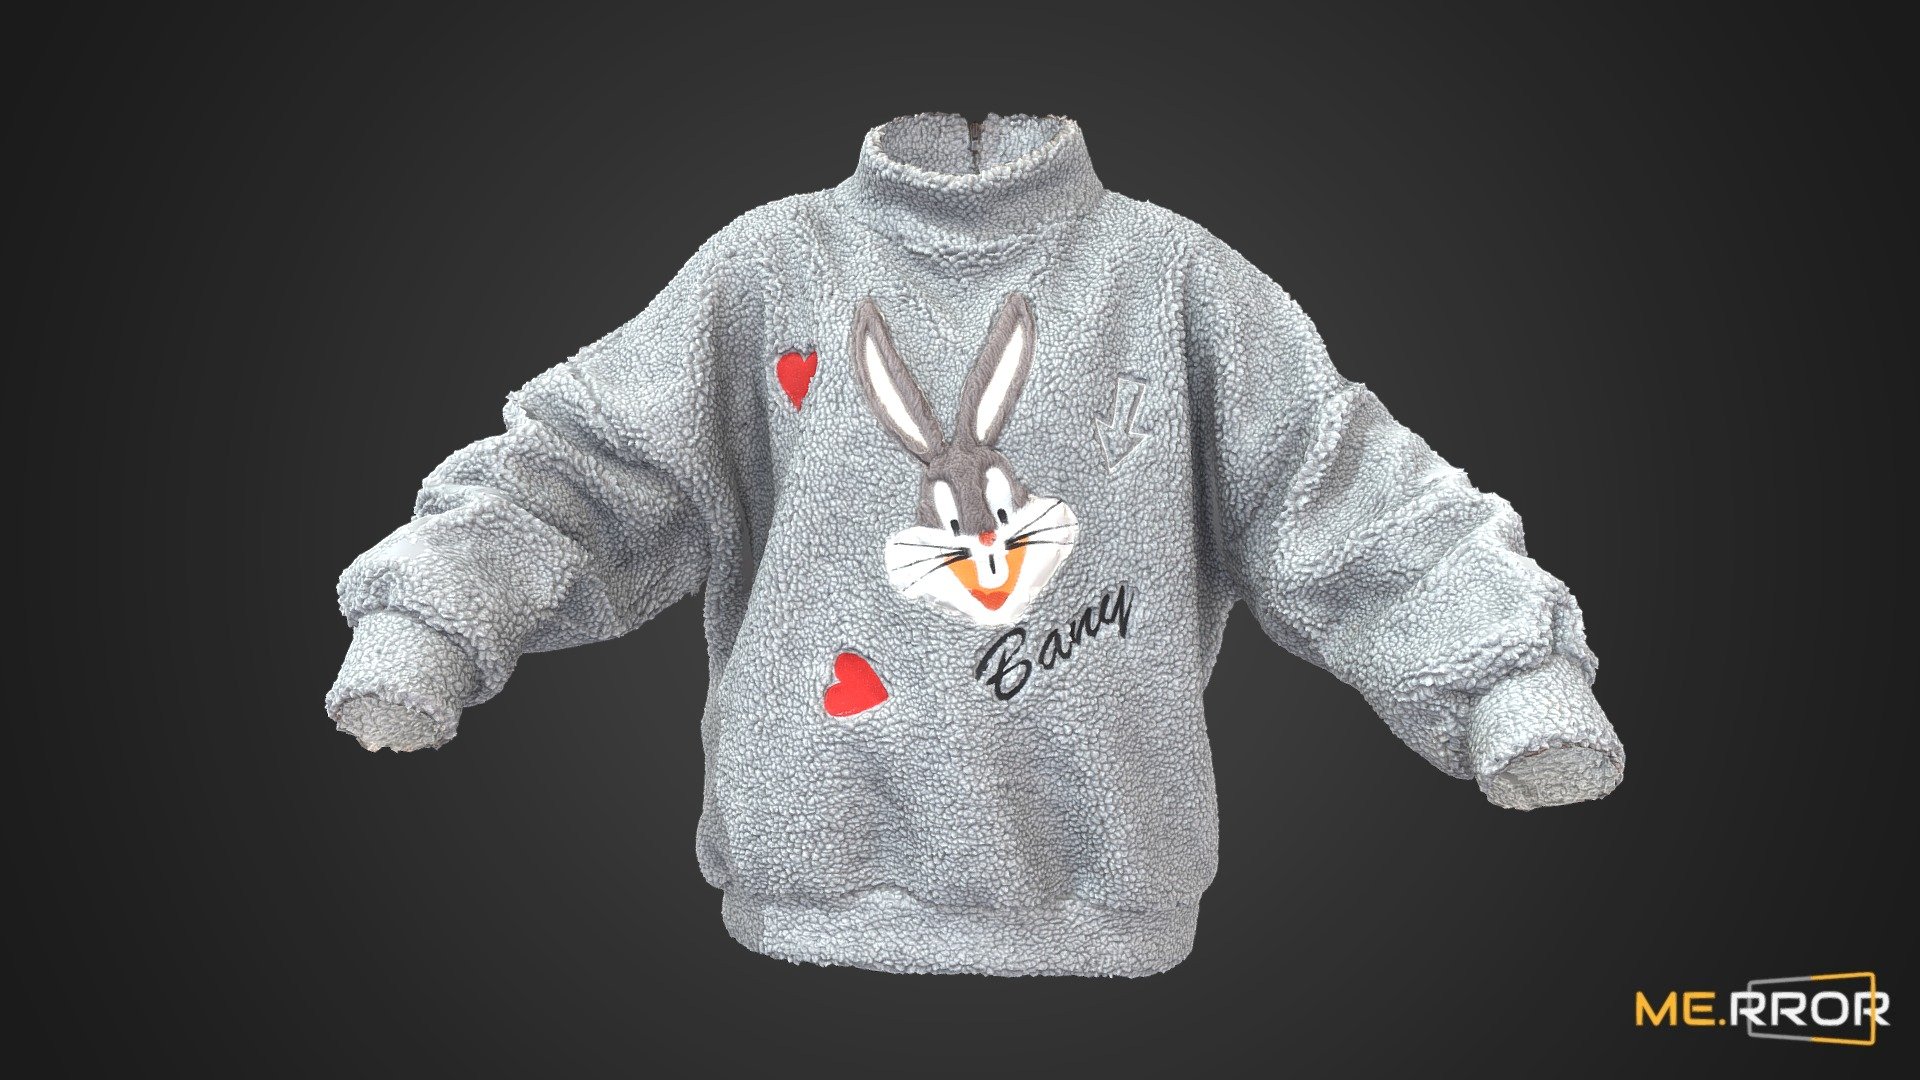 MERROR is a 3D Content PLATFORM which introduces various Asian assets to the 3D world


3DScanning #Photogrametry #ME.RROR - Gray Bany Fleece - Buy Royalty Free 3D model by ME.RROR (@merror) 3d model